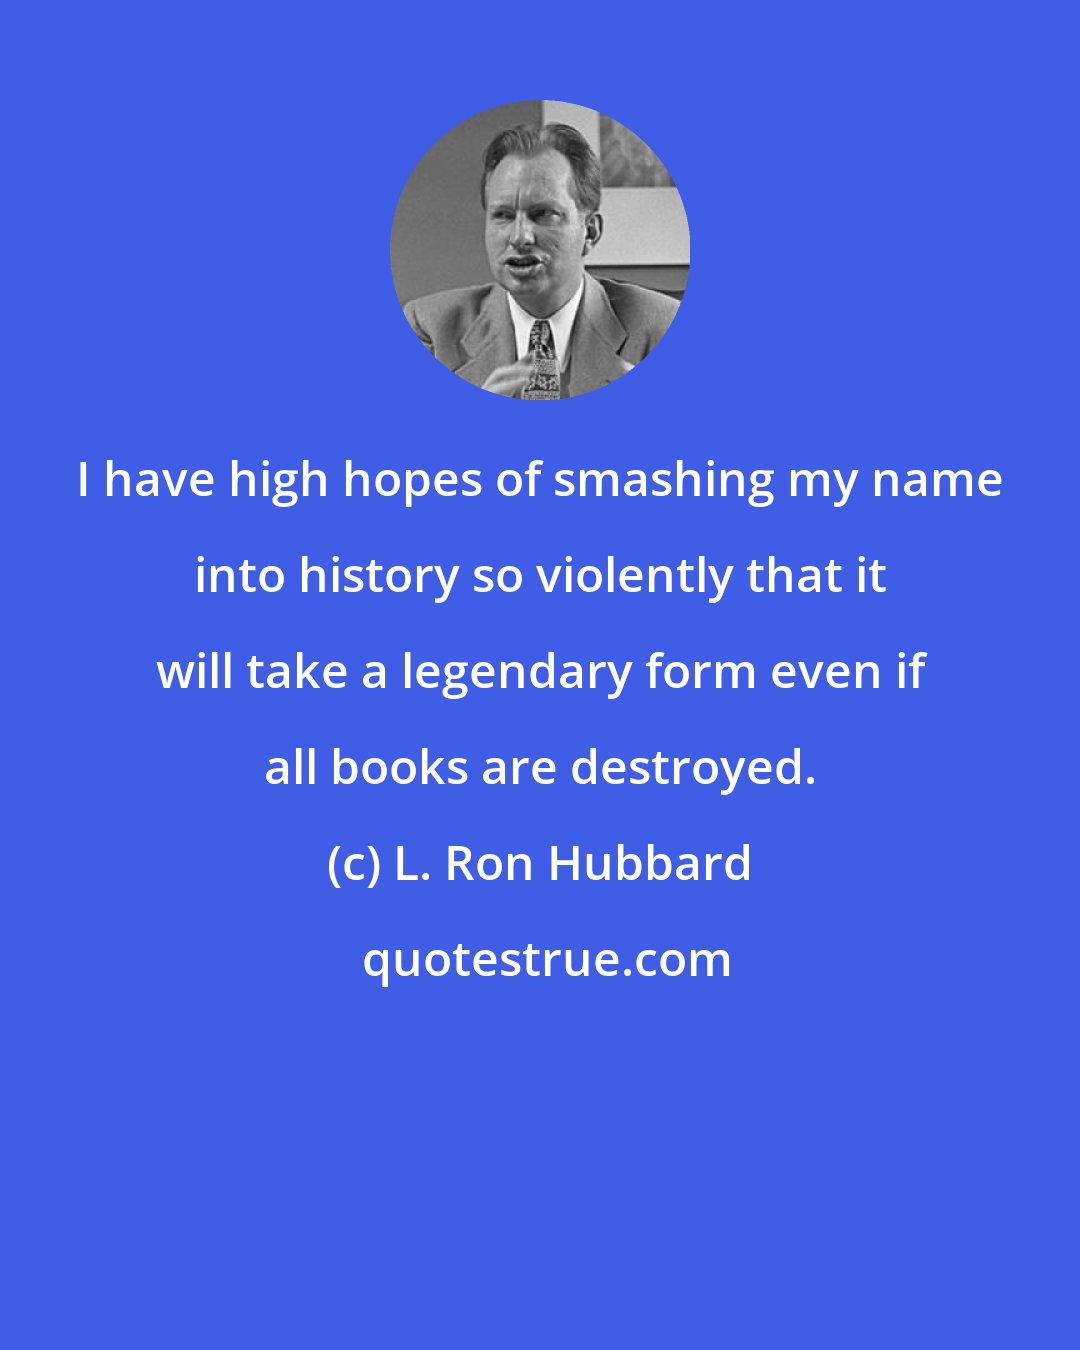 L. Ron Hubbard: I have high hopes of smashing my name into history so violently that it will take a legendary form even if all books are destroyed.